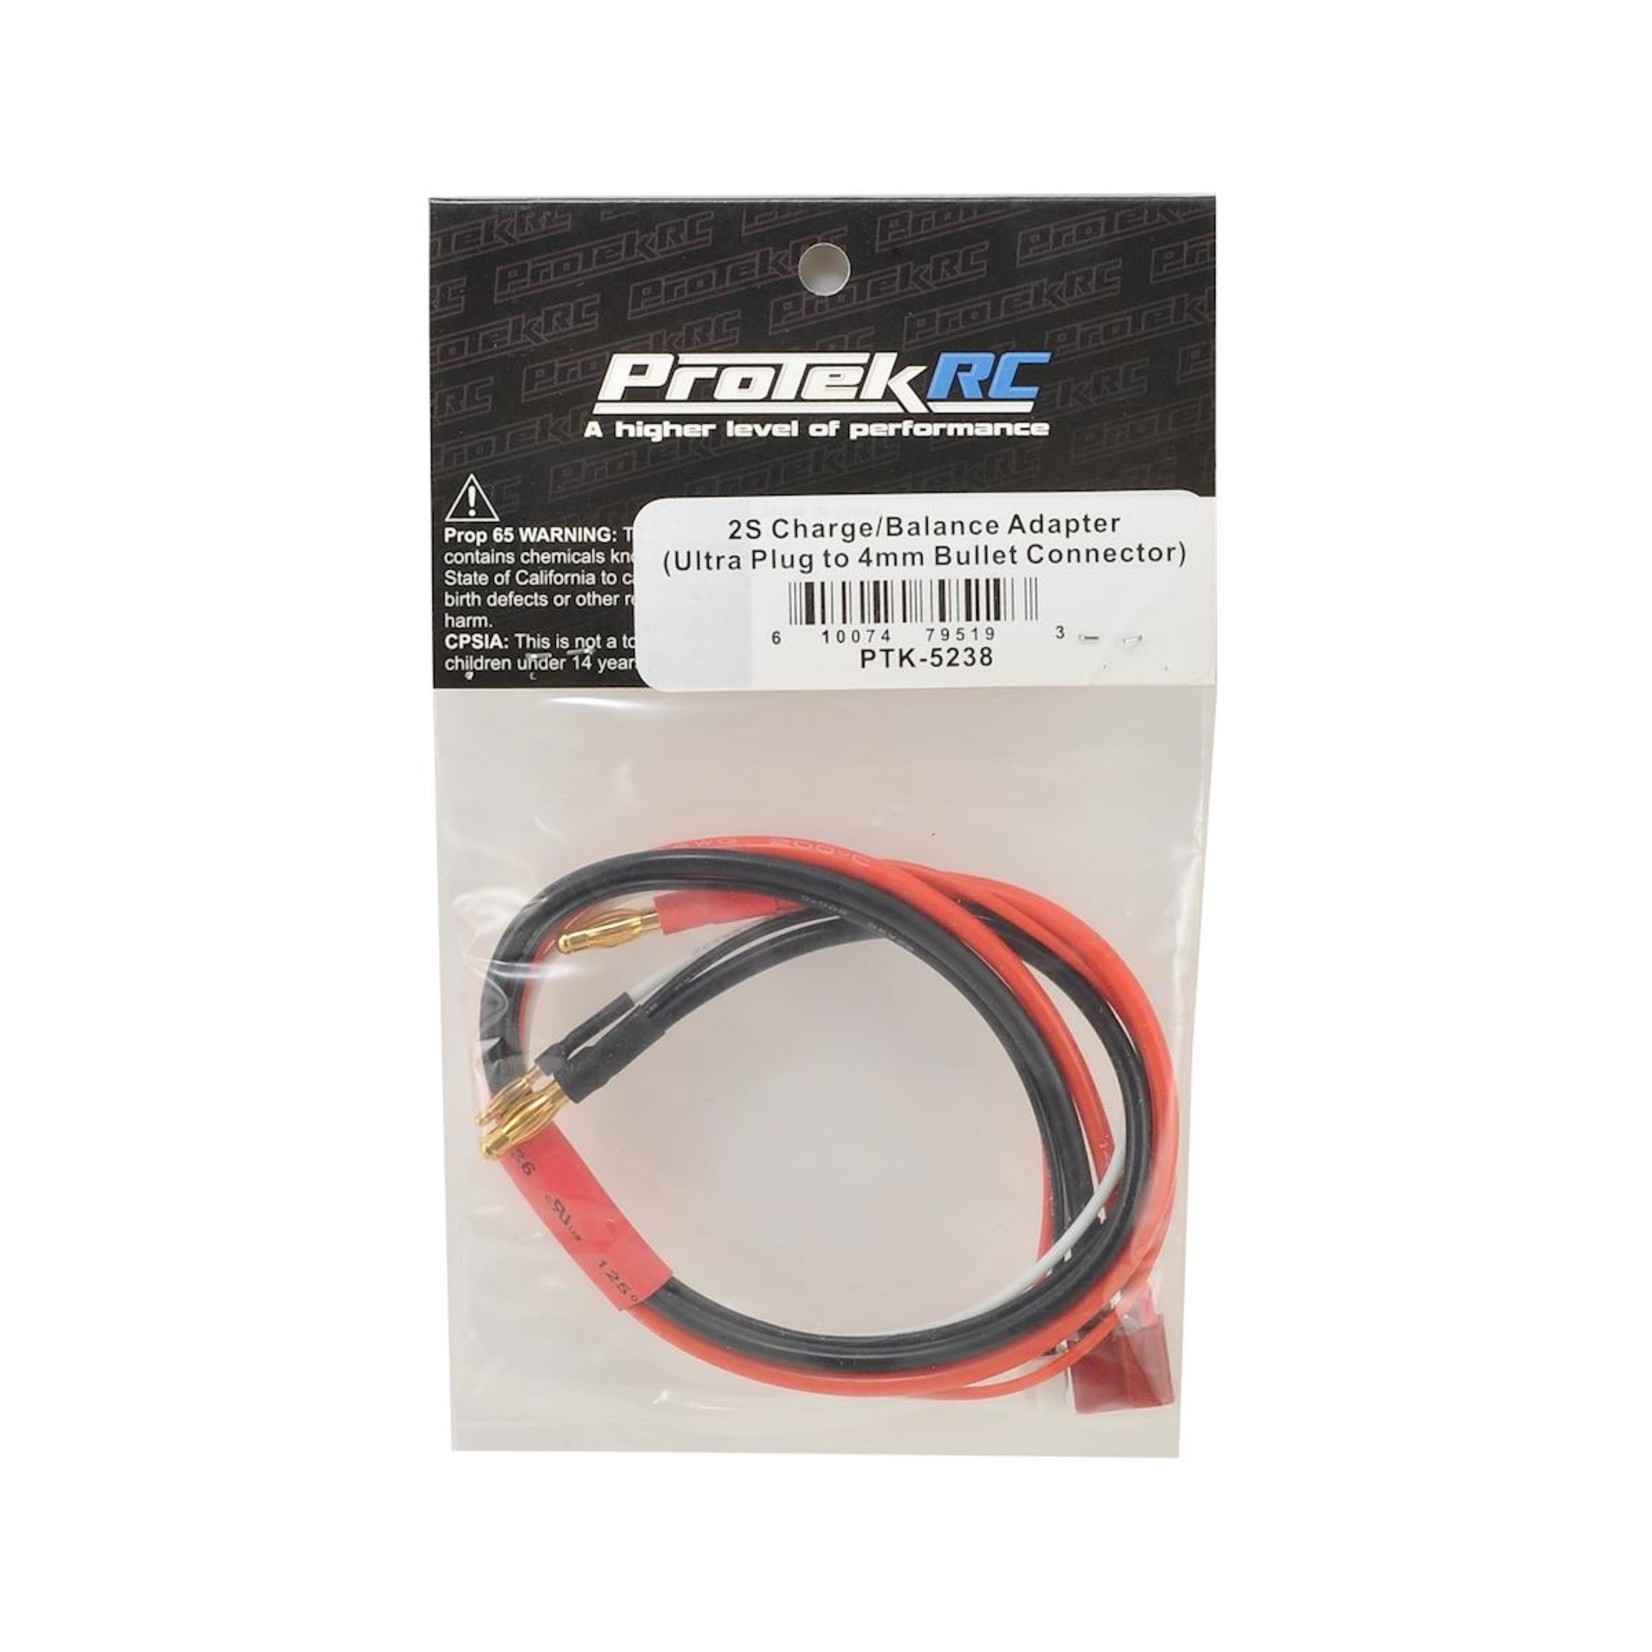 Protek R/C PTK-5238 ProTek RC 2S Charge/Balance Adapter (T-Style Ultra Plug to 4mm Bullet)